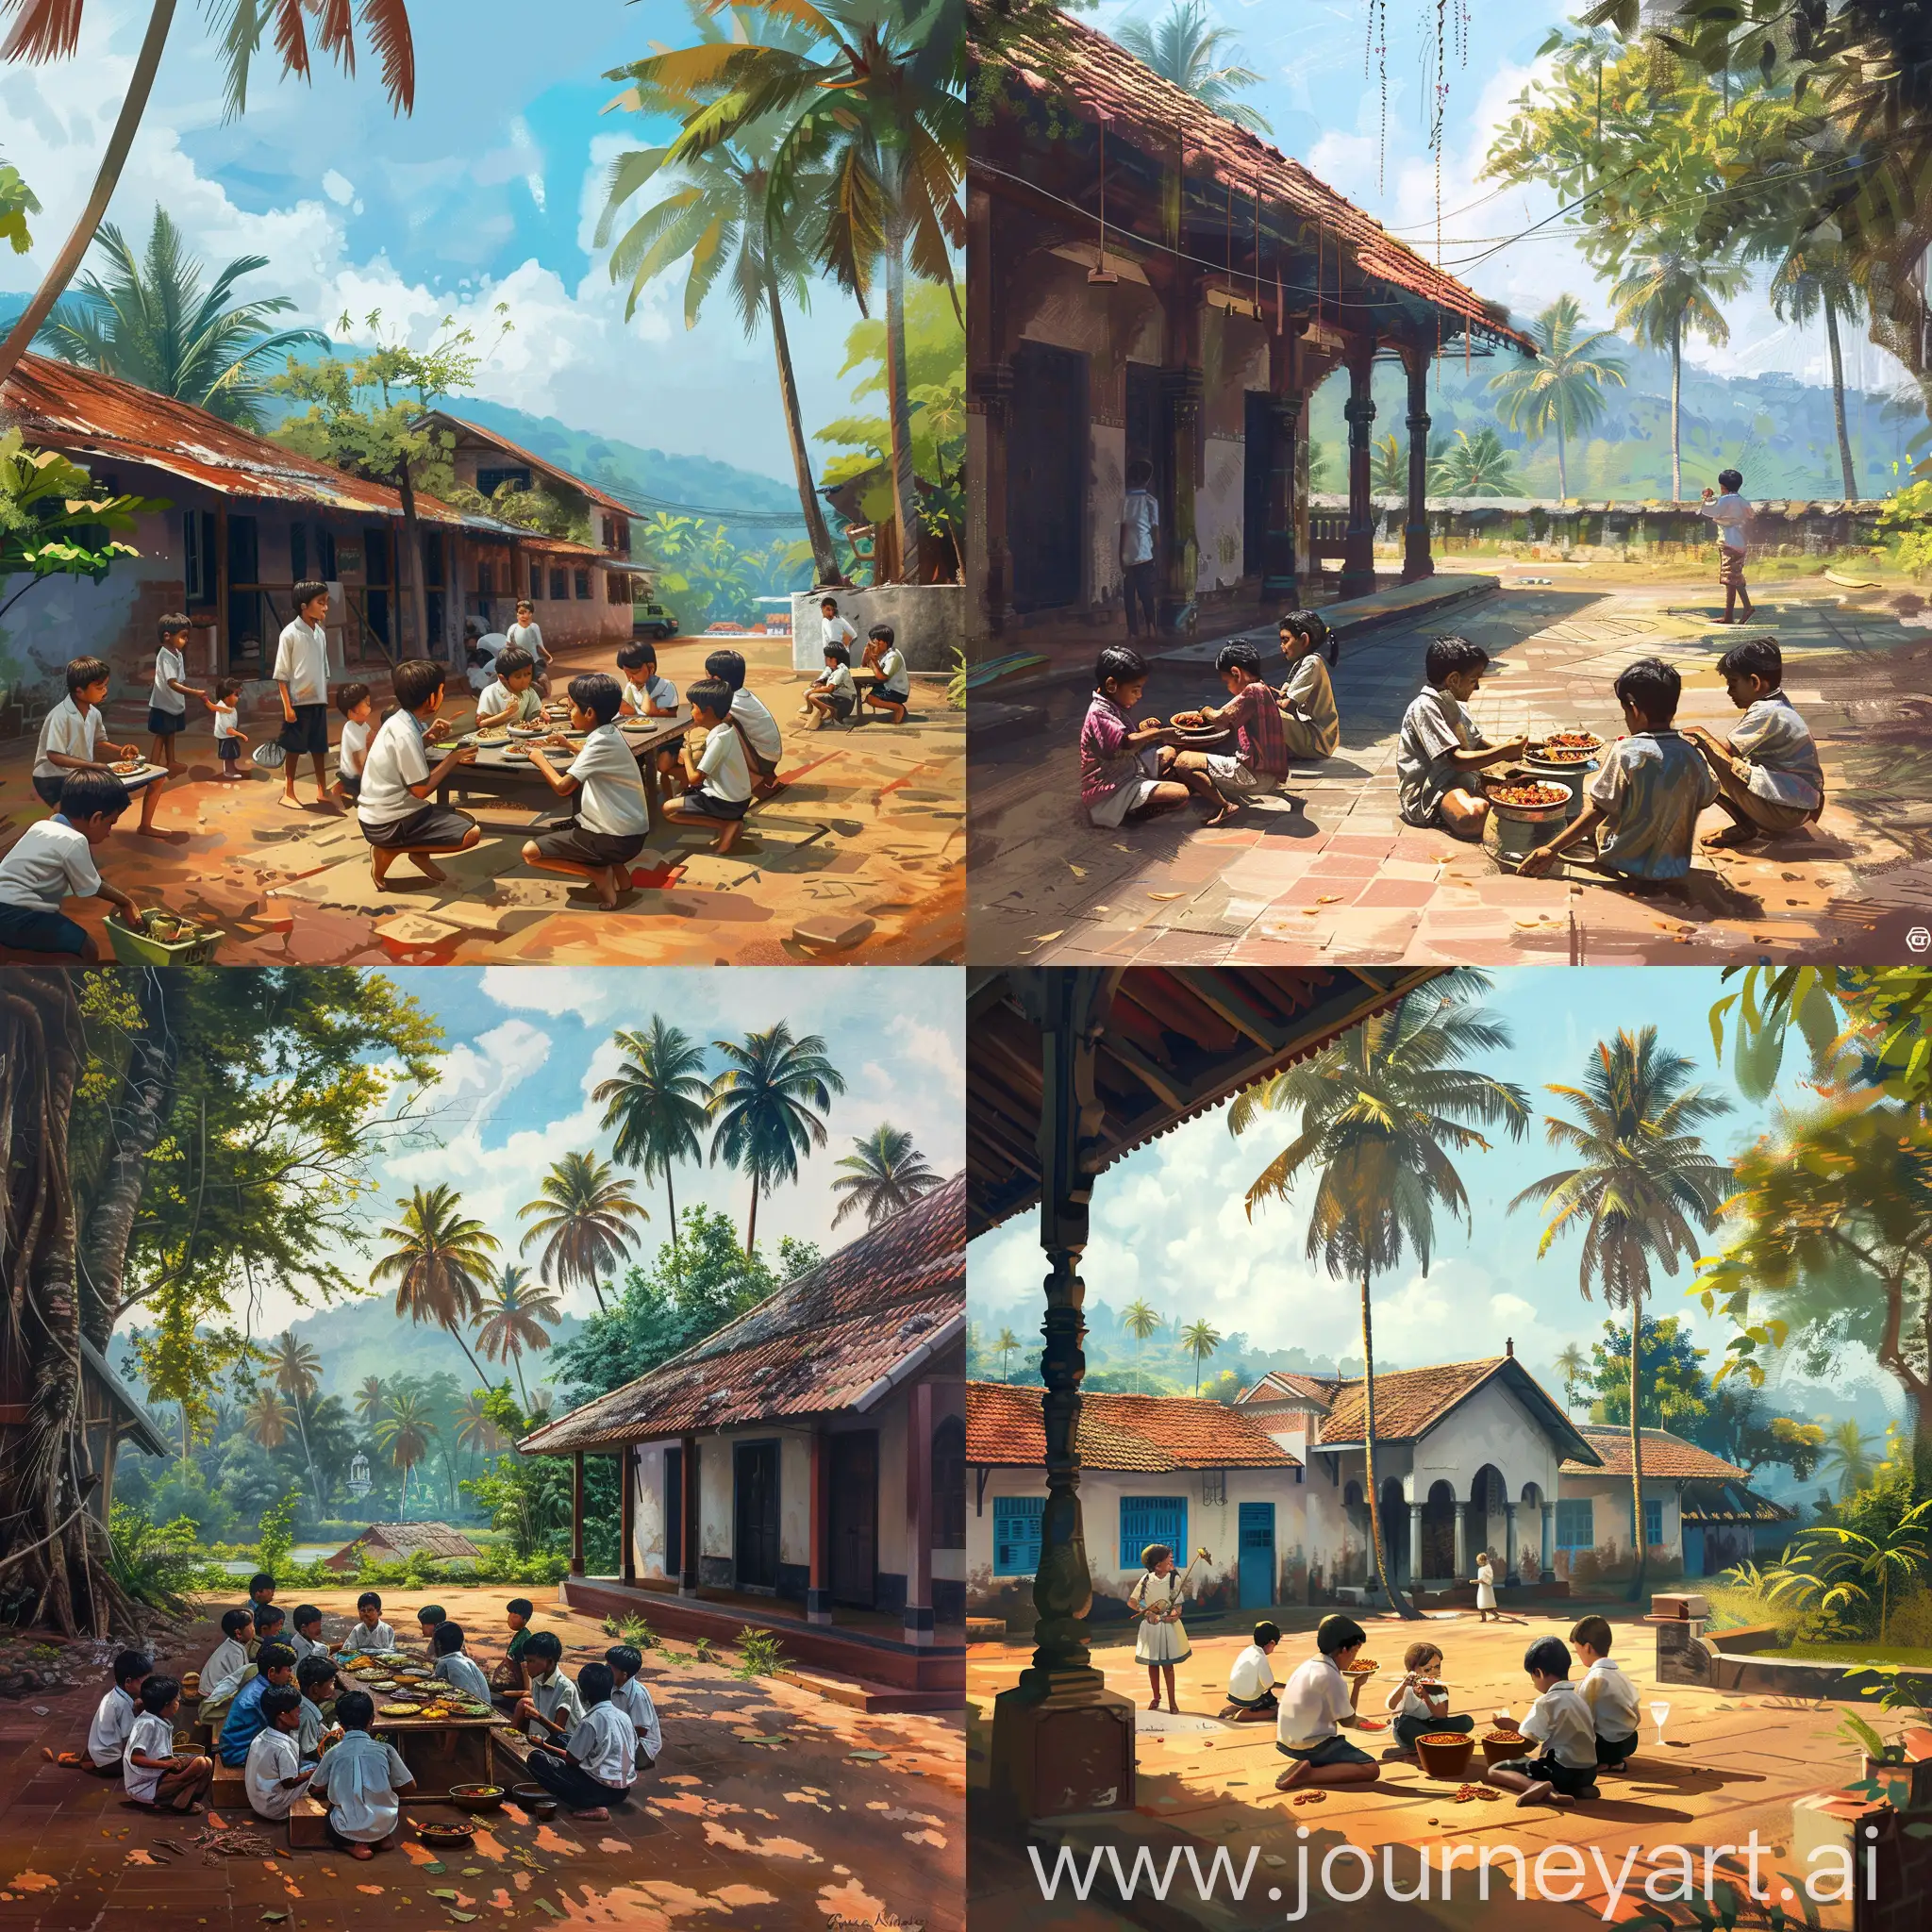 Charming-Scene-Traditional-Kerala-School-Lunch-Amidst-Nature